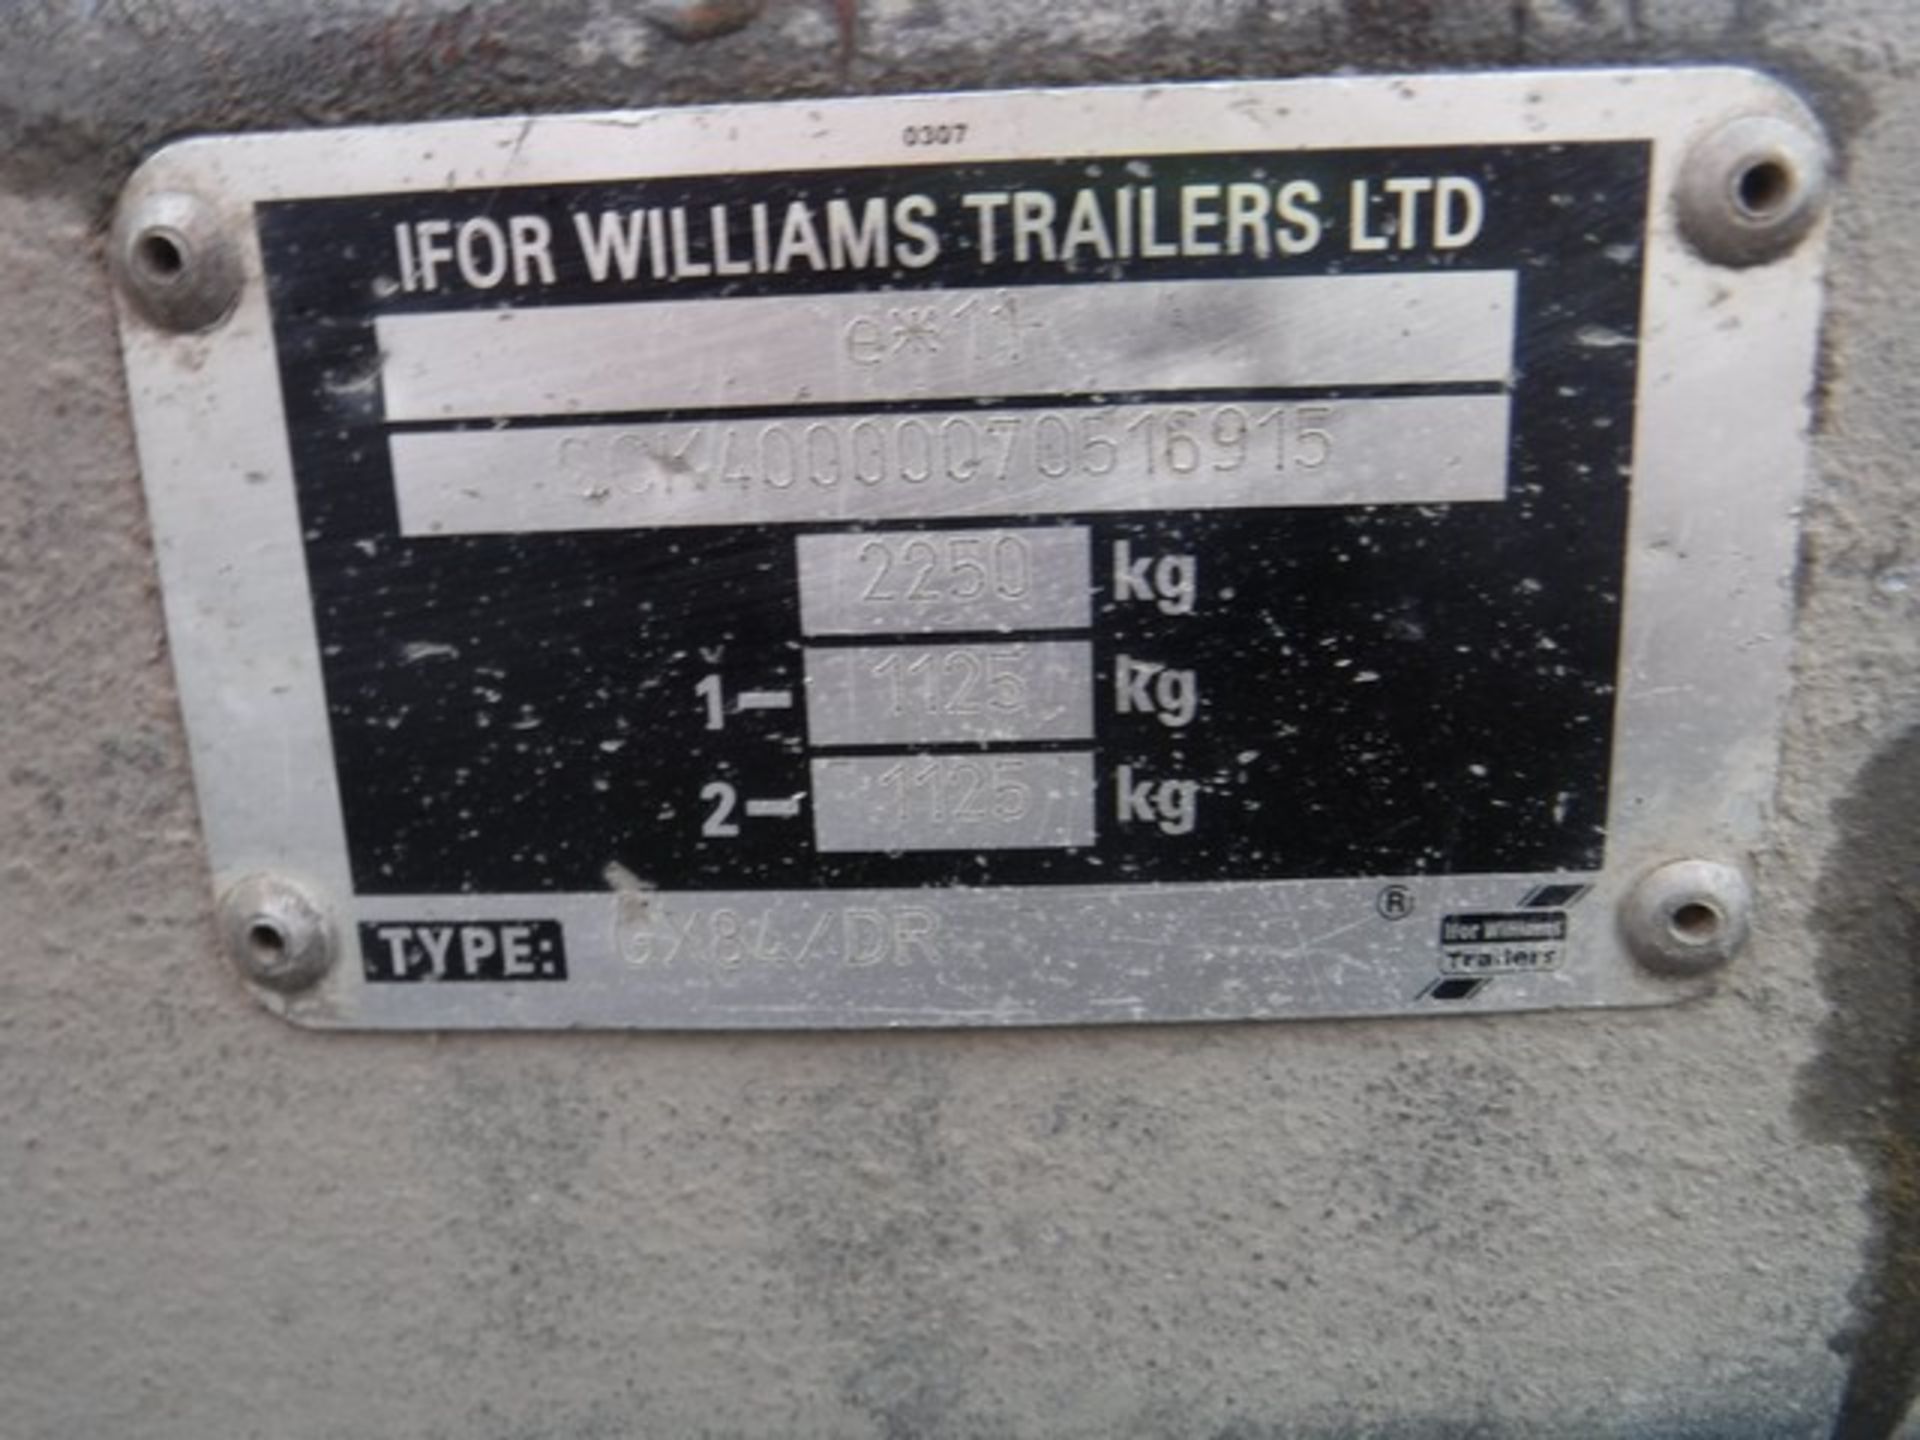 IFOR WILLIAMS 8' X 4' TWIN AXLE PLANT TRAILER, S/N 070516915, ASSET NO 758-7029 - Image 4 of 5